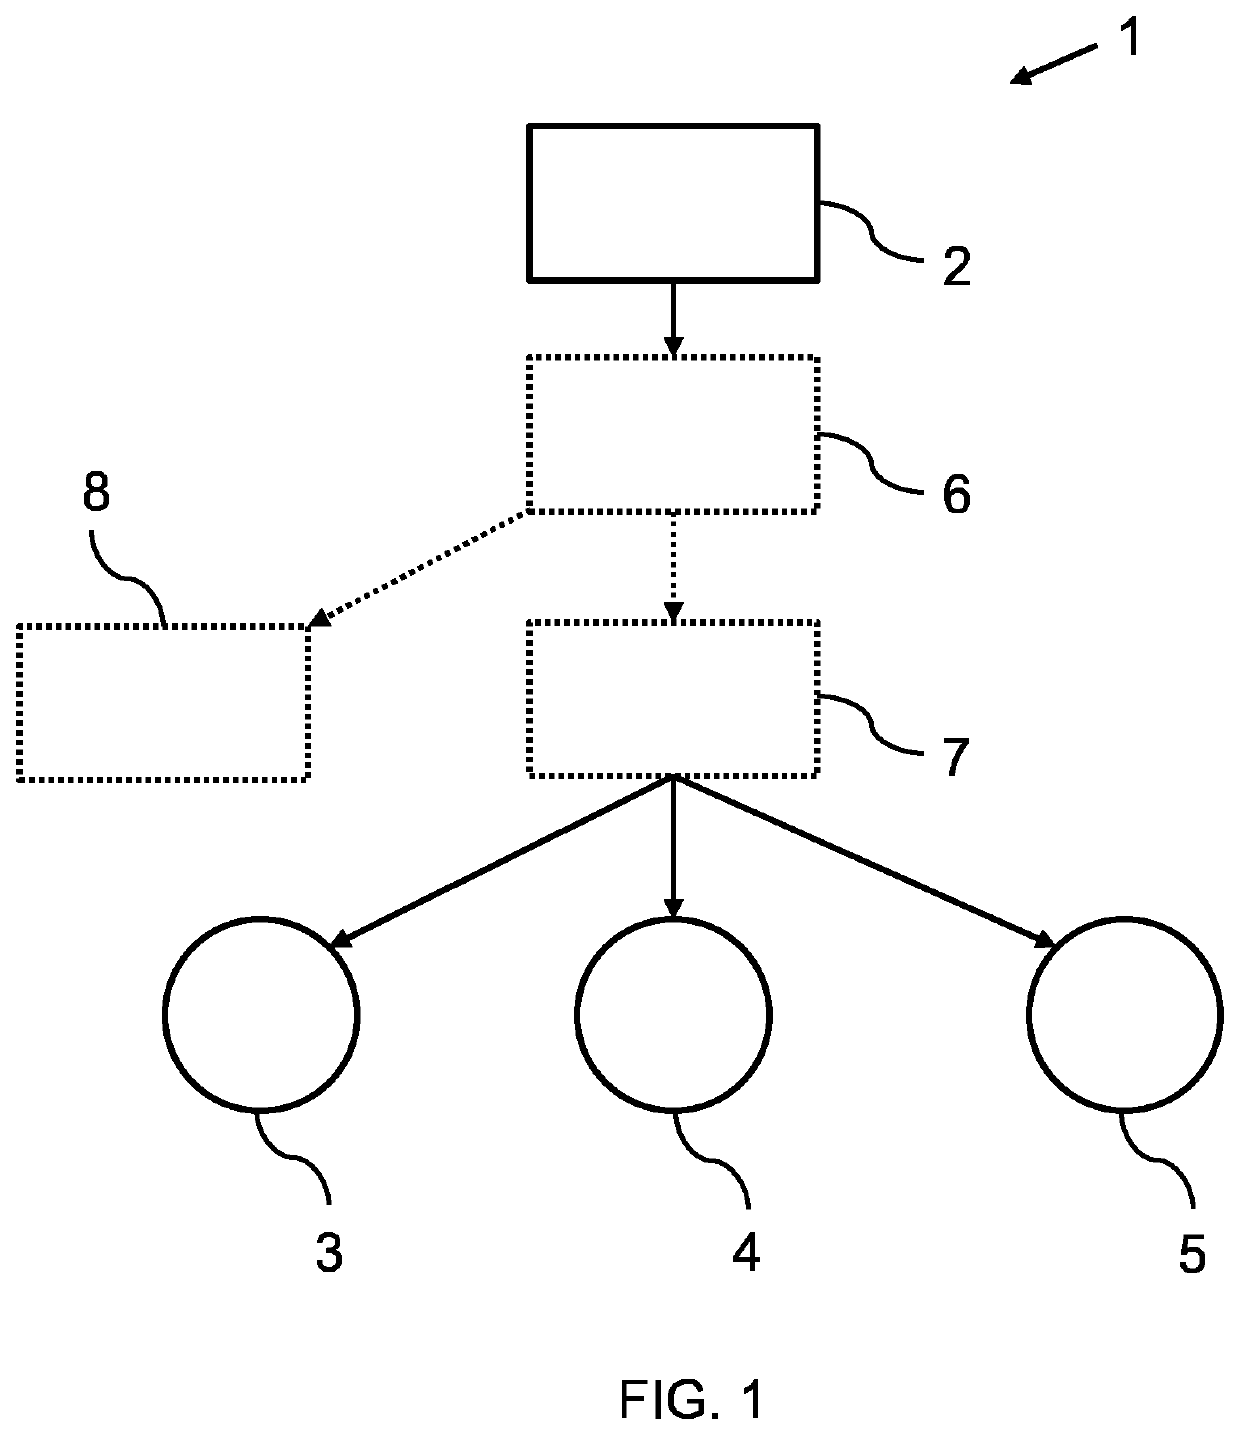 Controlling end nodes of a low-power wide area network